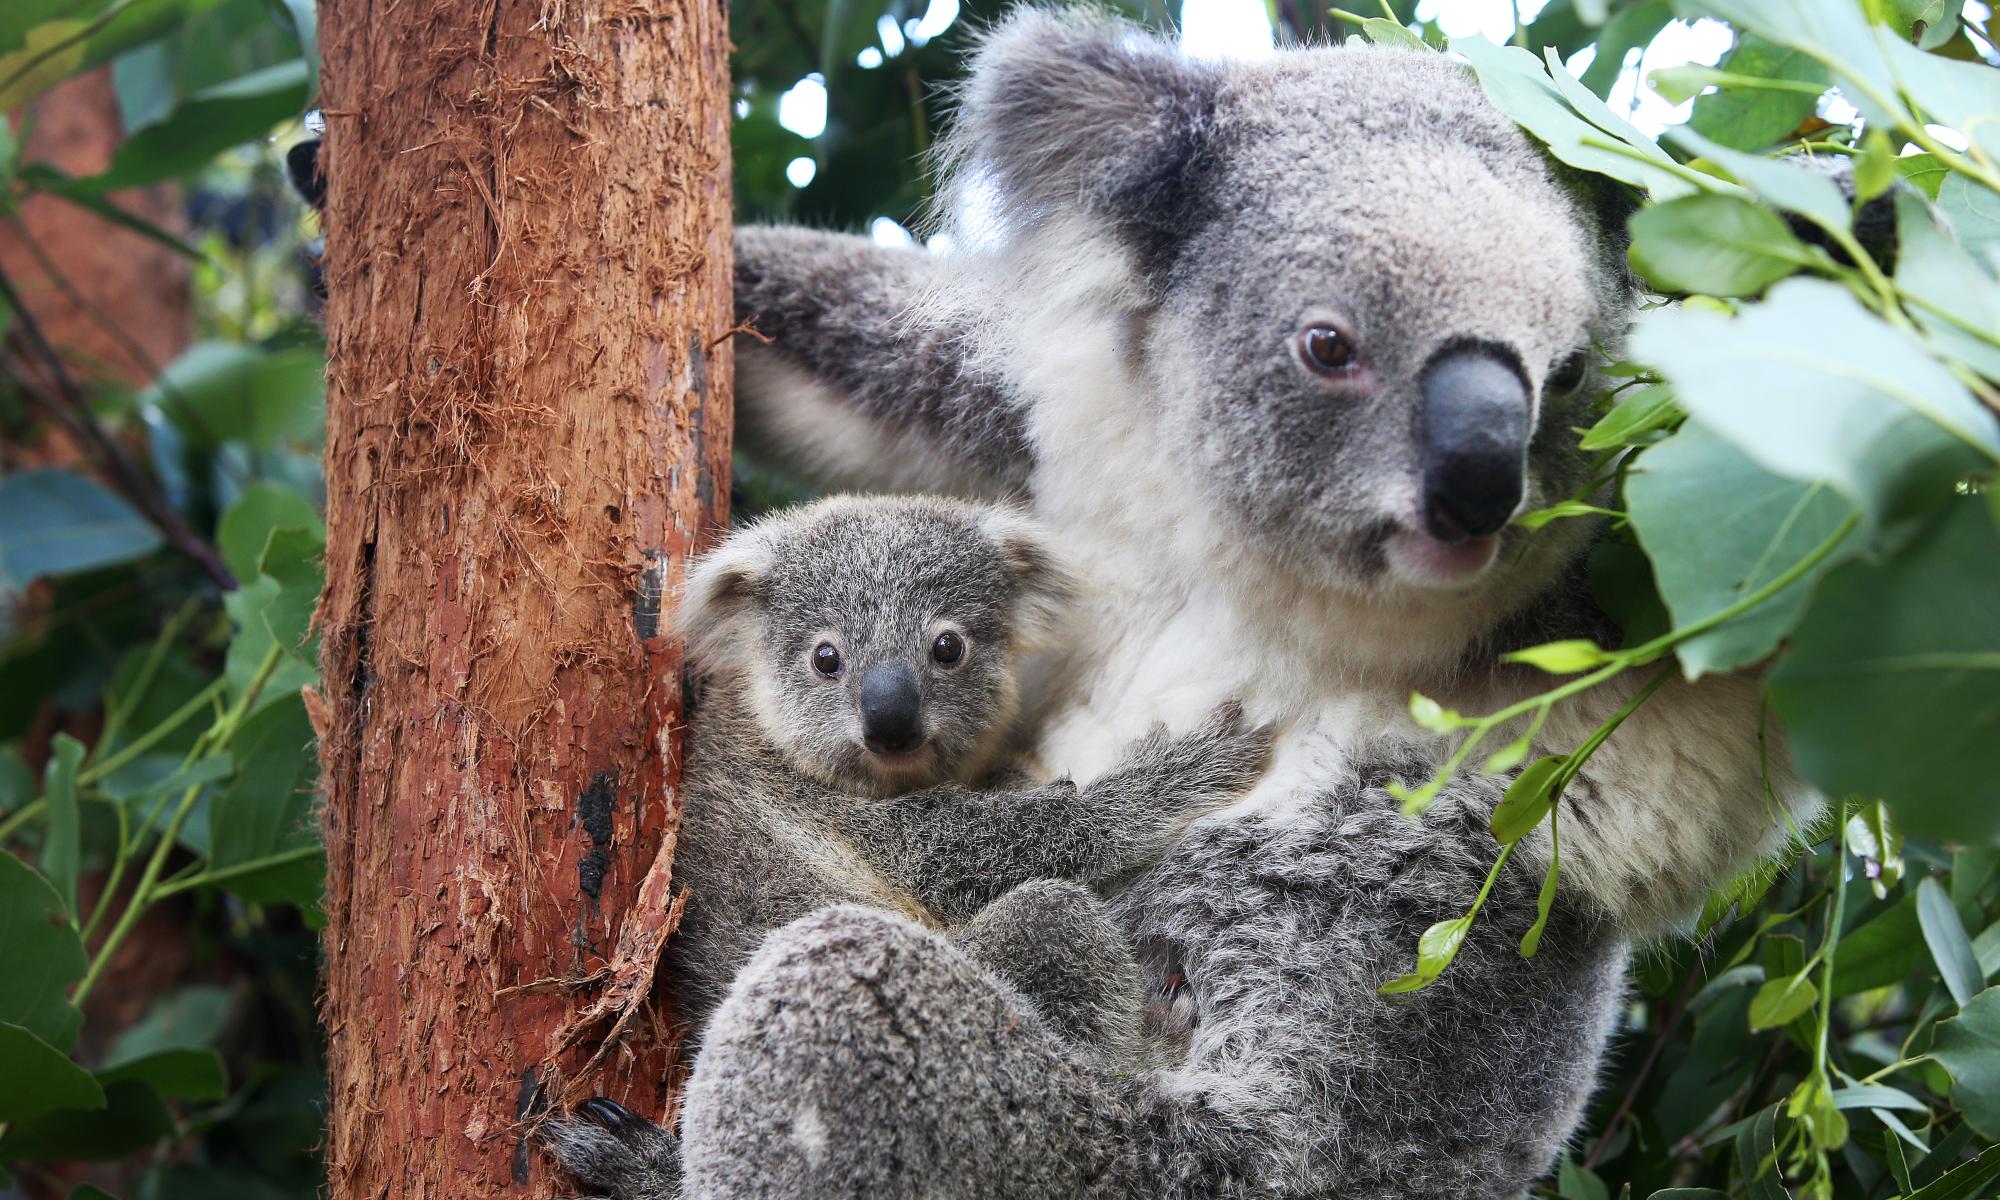 ‘A drop in the ocean’: government’s $50m koala pledge won’t tackle root cause of decline